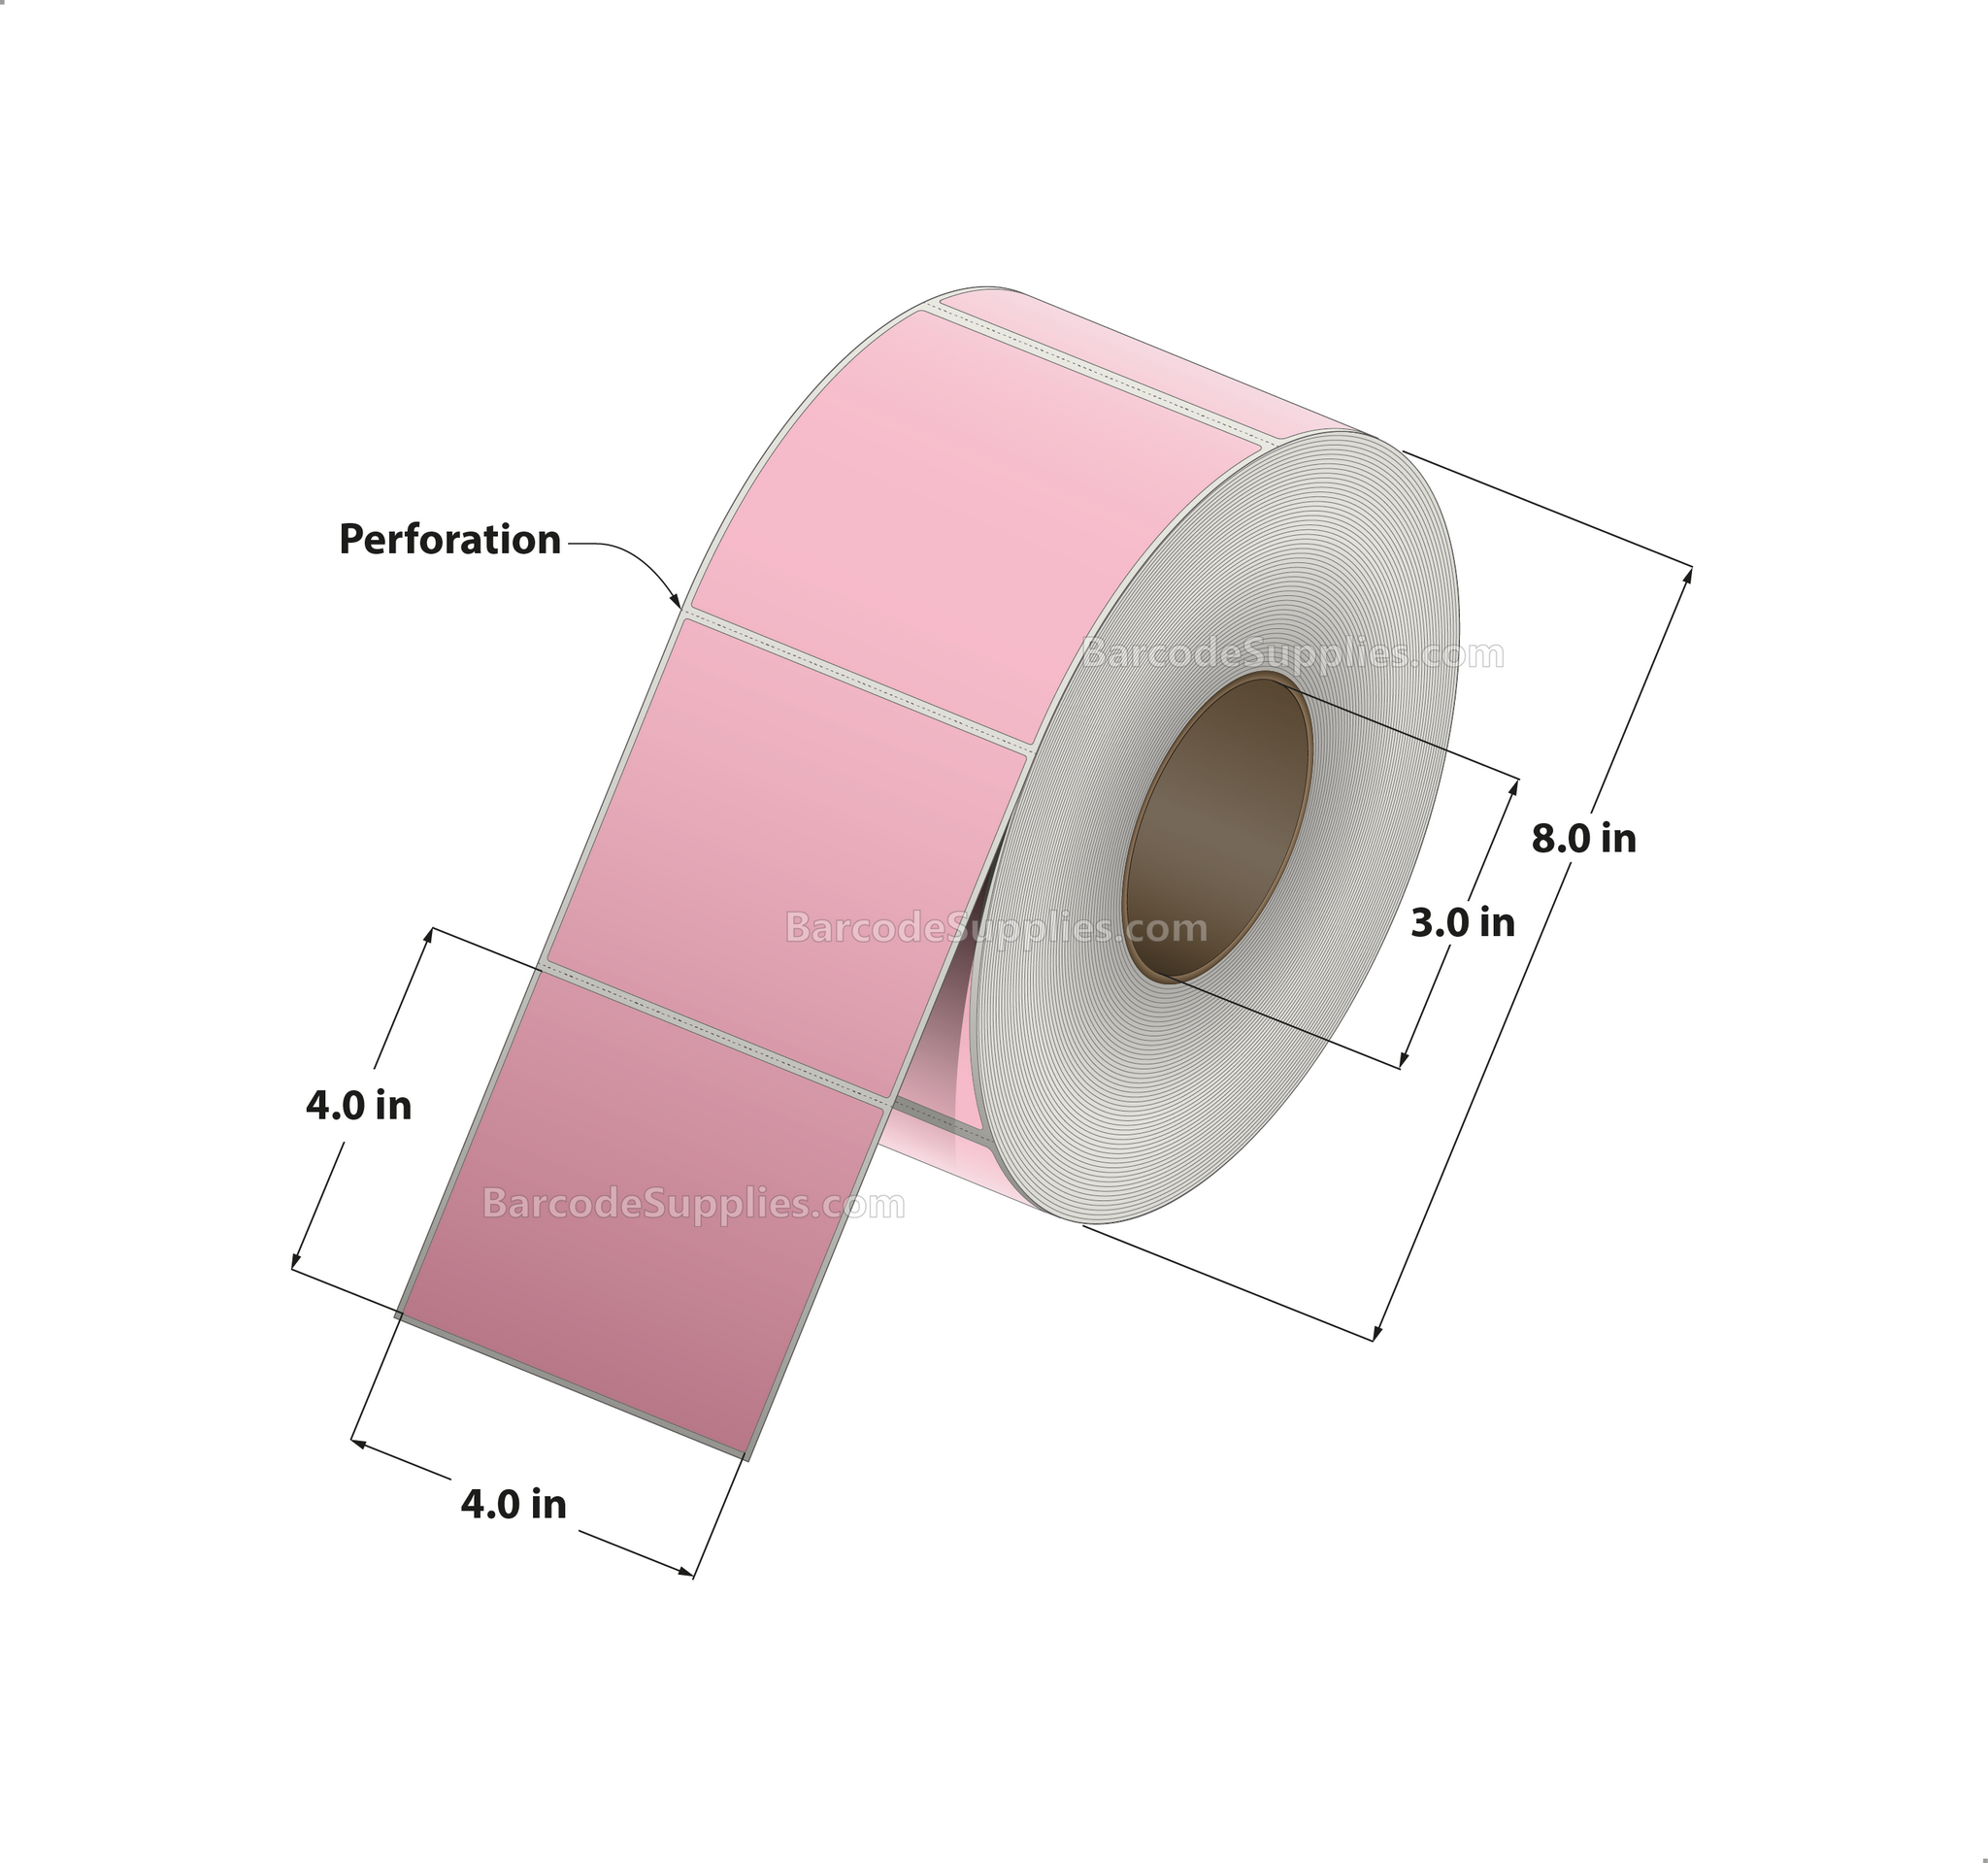 4 x 4 Thermal Transfer 196 Pink Labels With Permanent Acrylic Adhesive - Perforated - 1500 Labels Per Roll - Carton Of 4 Rolls - 6000 Labels Total - MPN: TH44-1PP